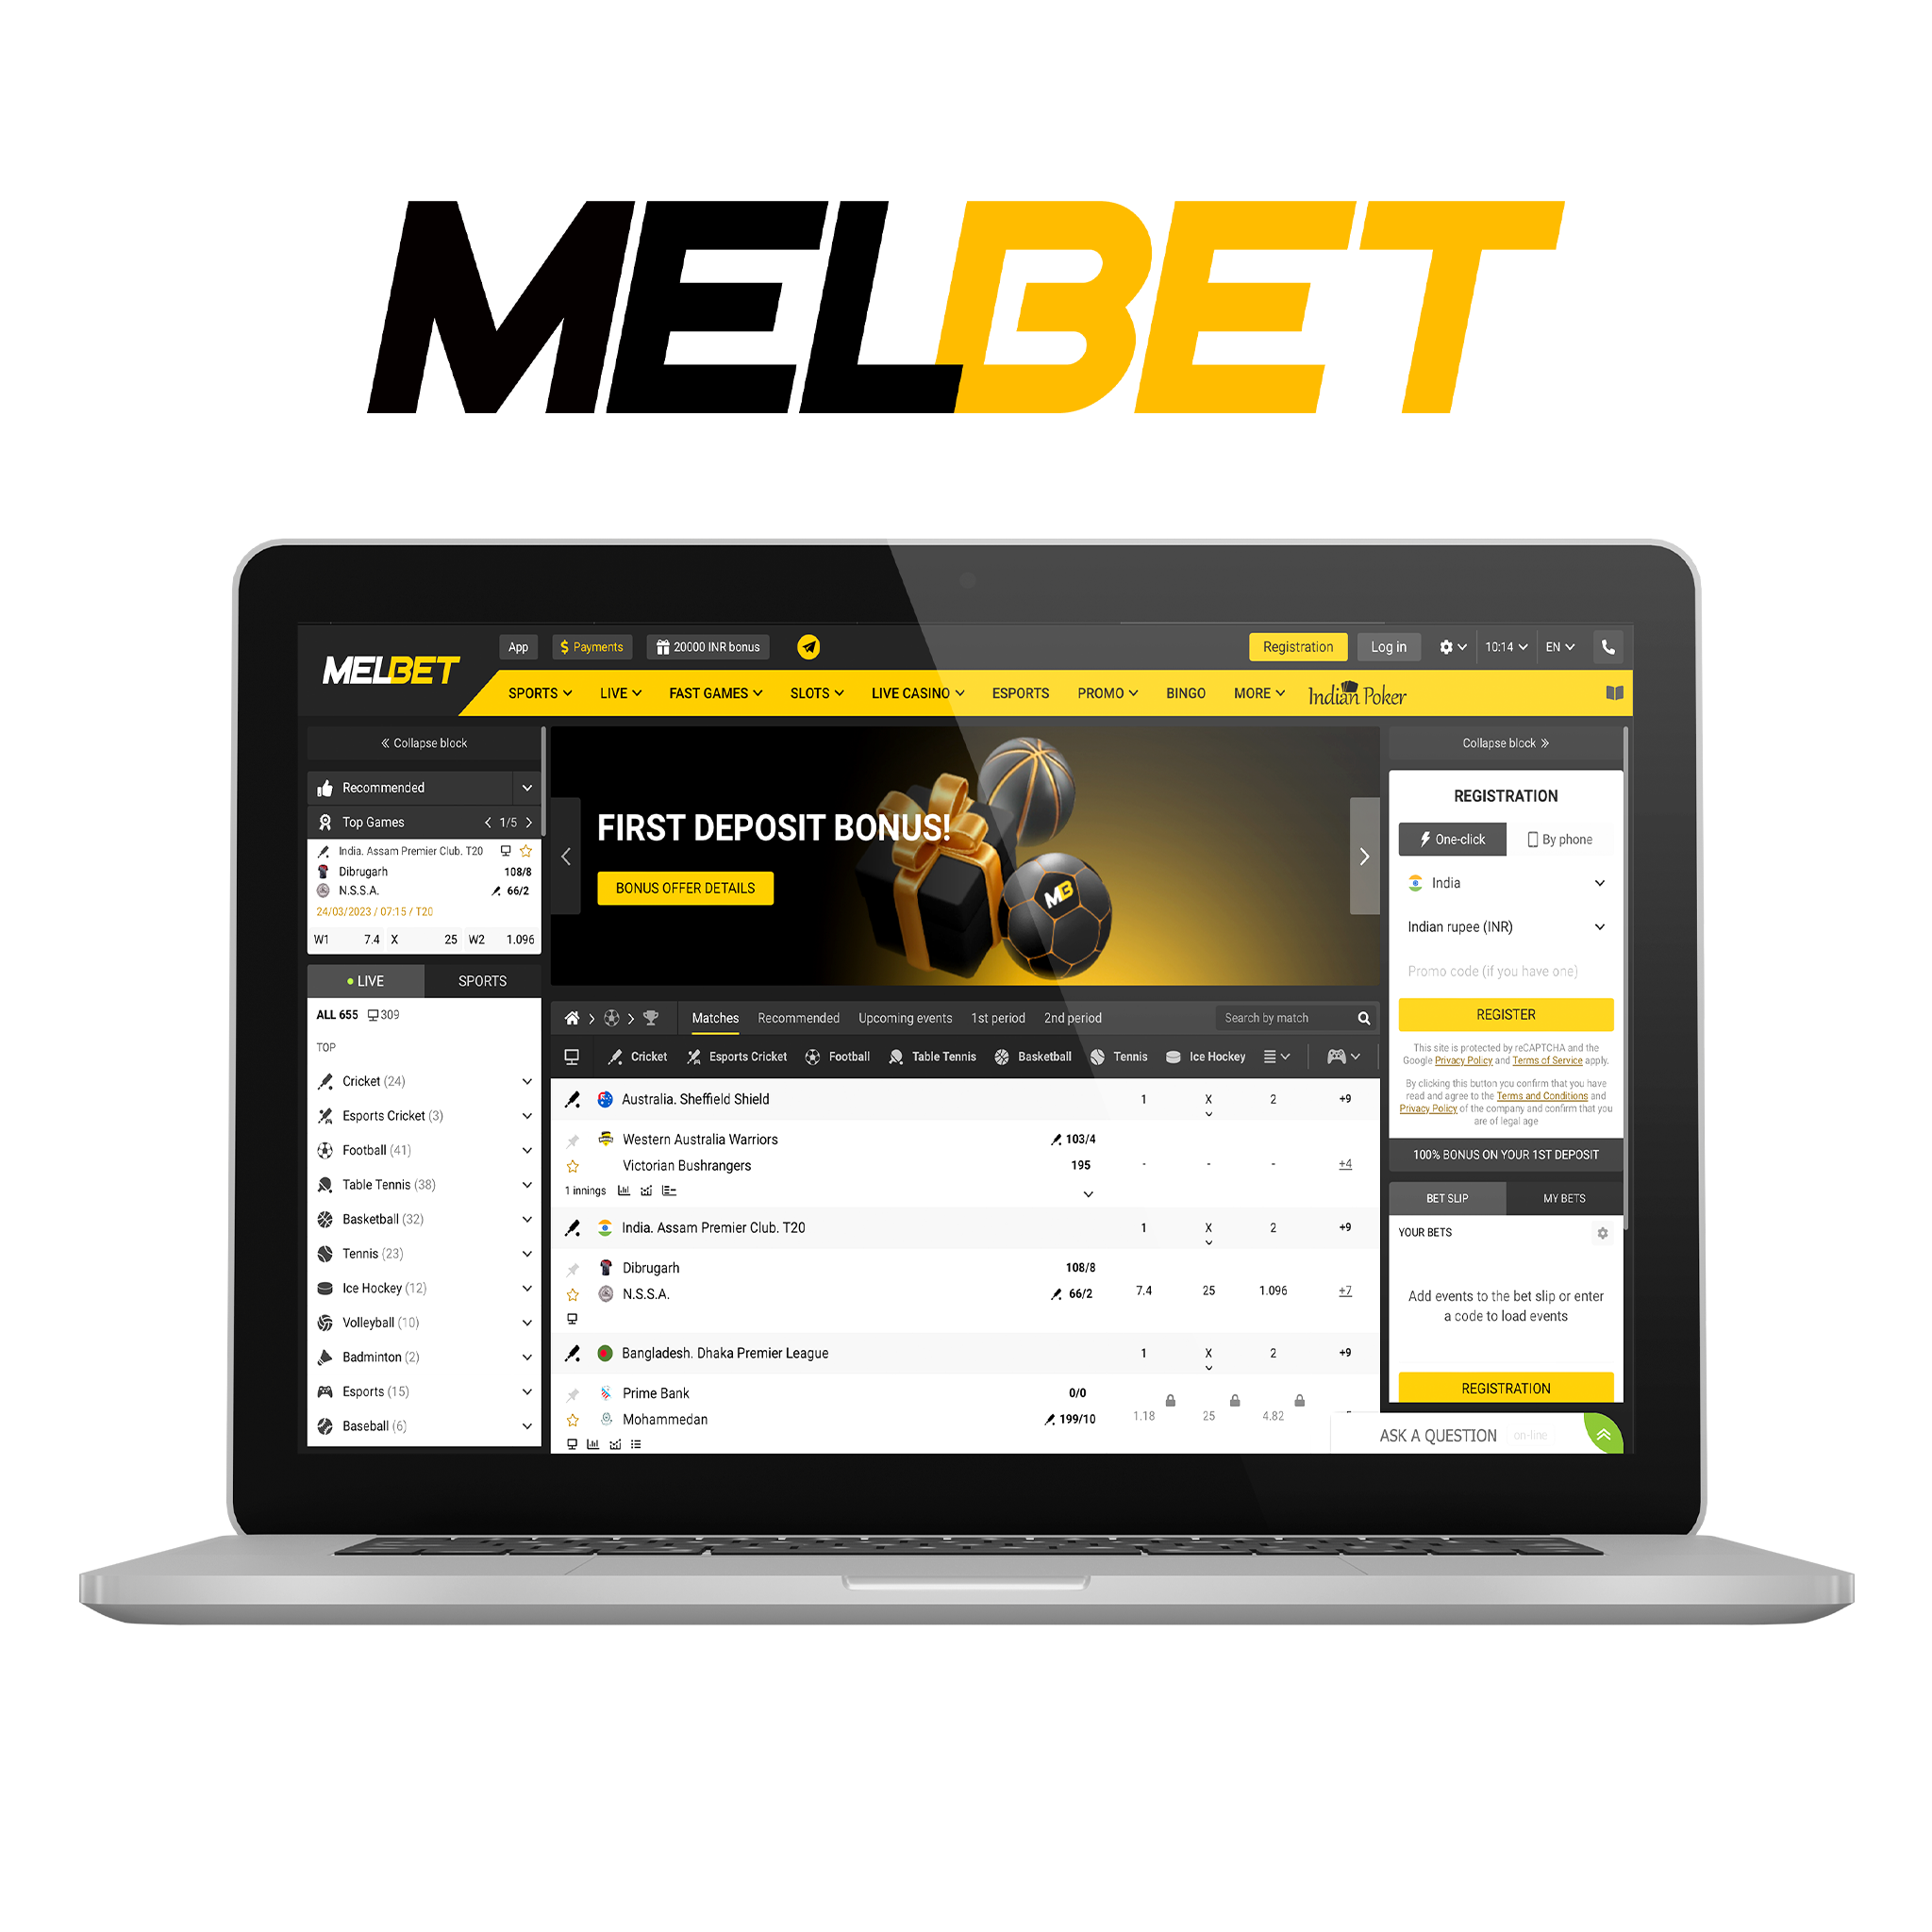 Melbet allows betting on more than 50 destinations.